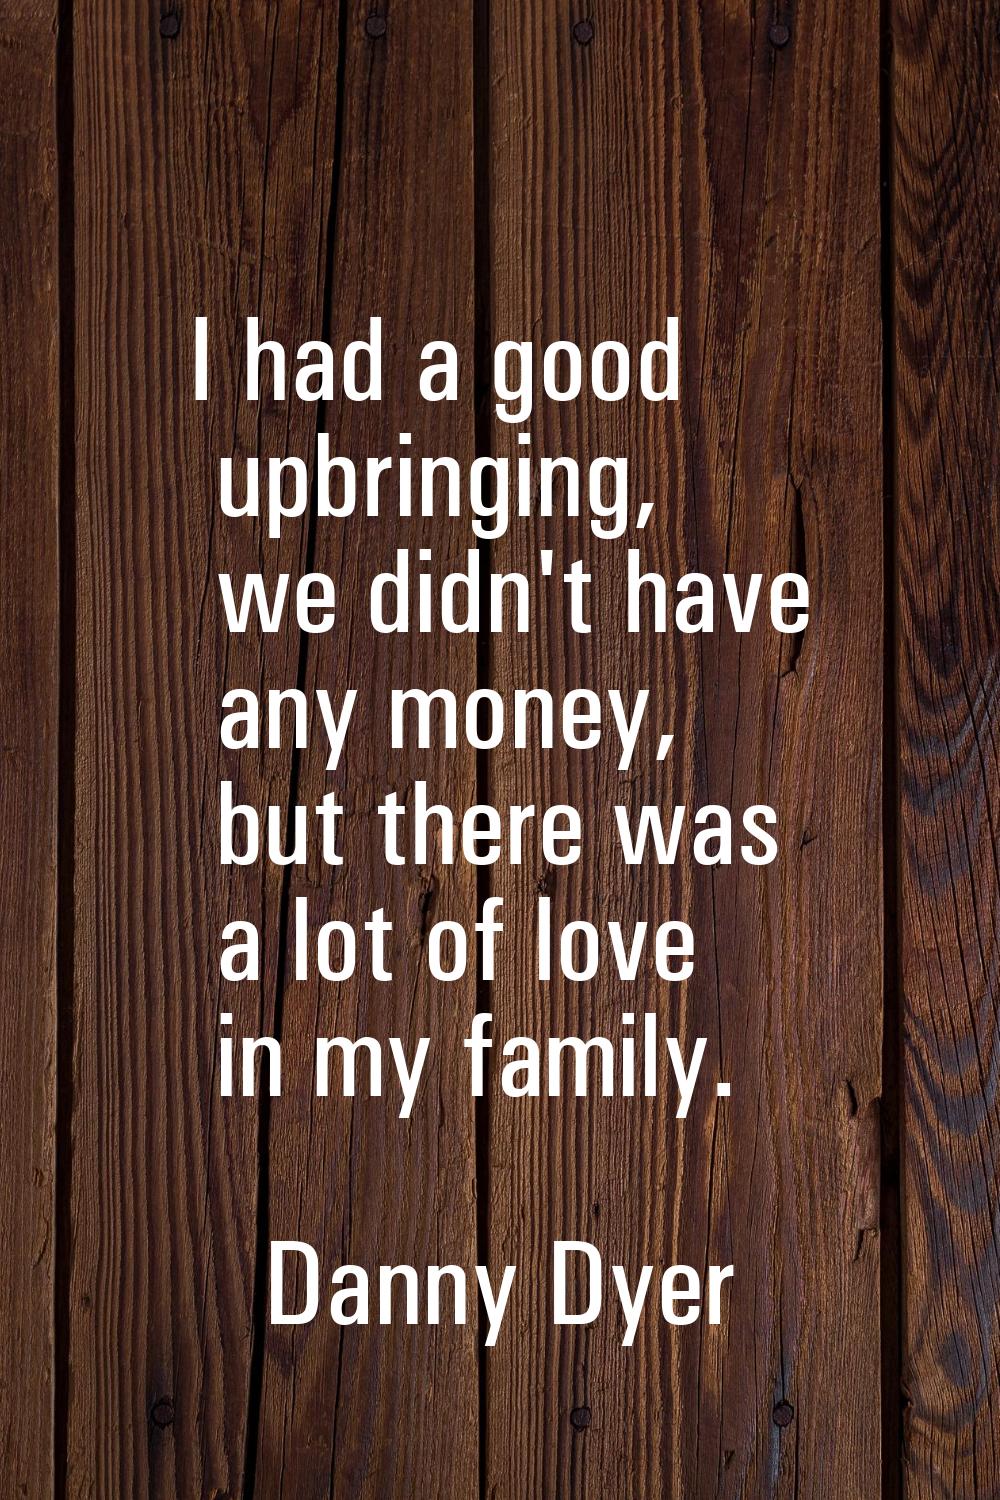 I had a good upbringing, we didn't have any money, but there was a lot of love in my family.